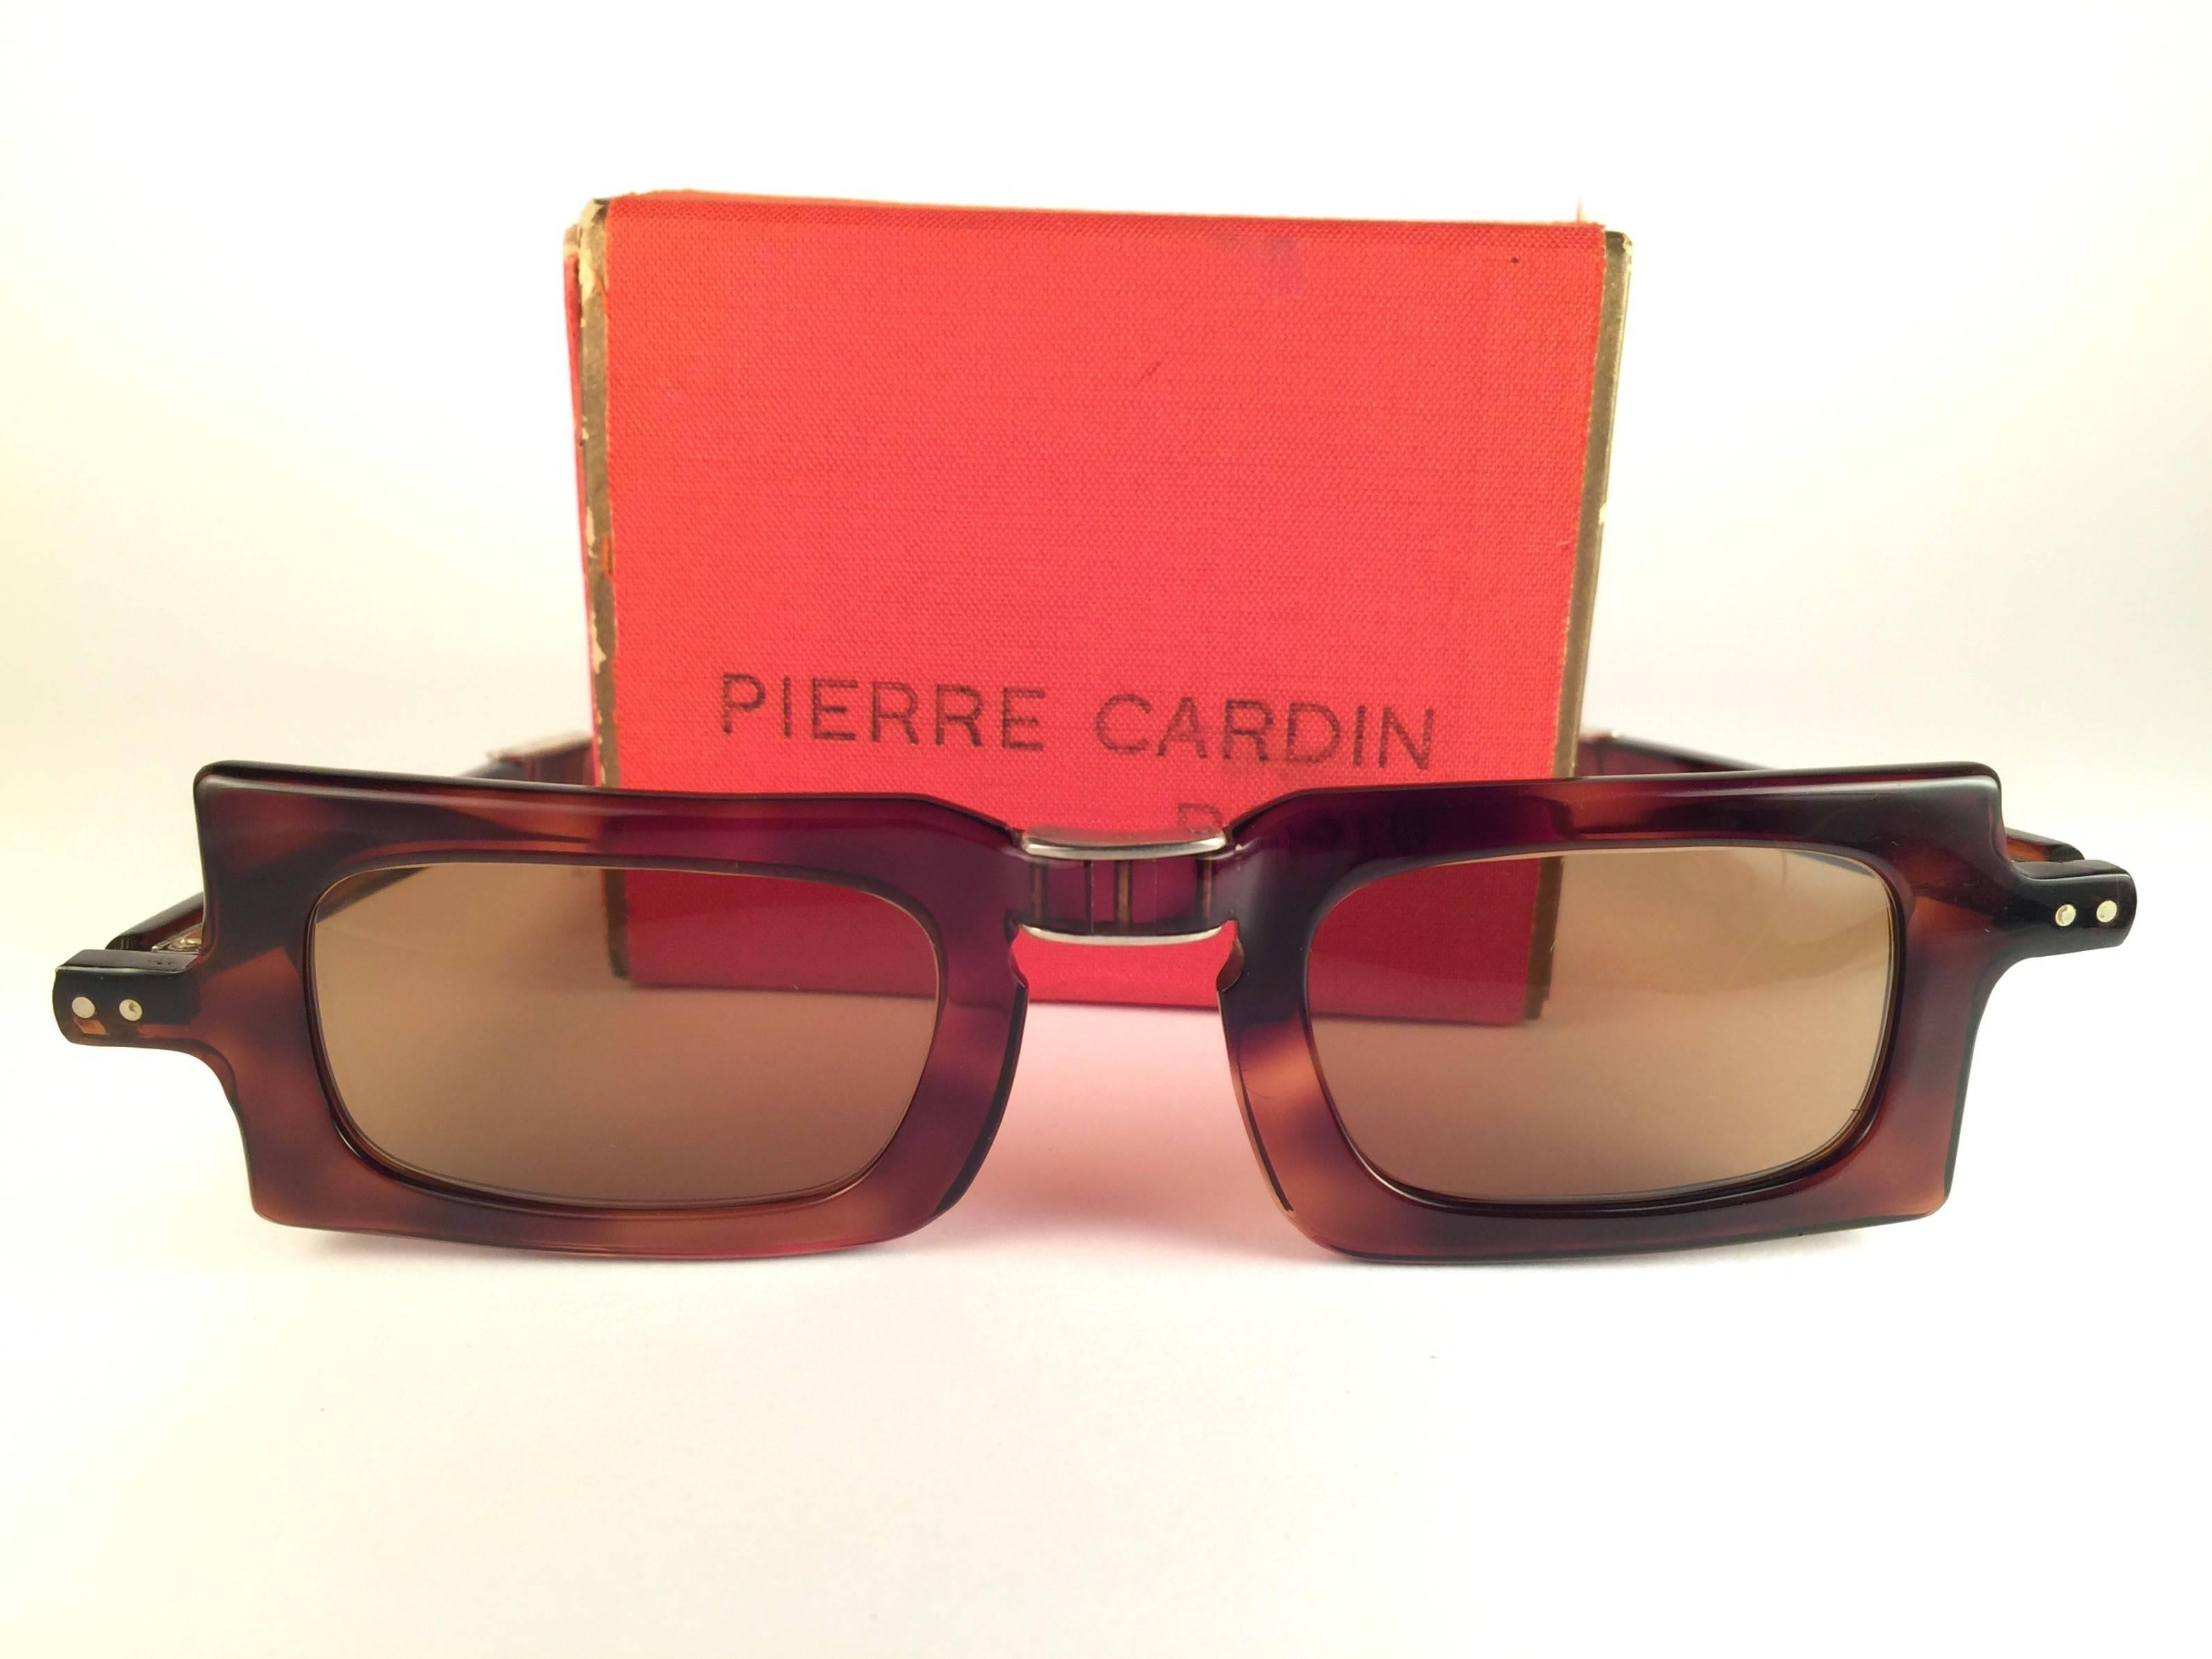 Vintage Pierre Cardin Tortoise foldable frame with amber lenses. 
Comes with its original Pierre Cardin 1960's carton and fabric tangerine box. 
This seldom piece has sign of wear on them due to nearly 60 years of storage.

This pair of vintage